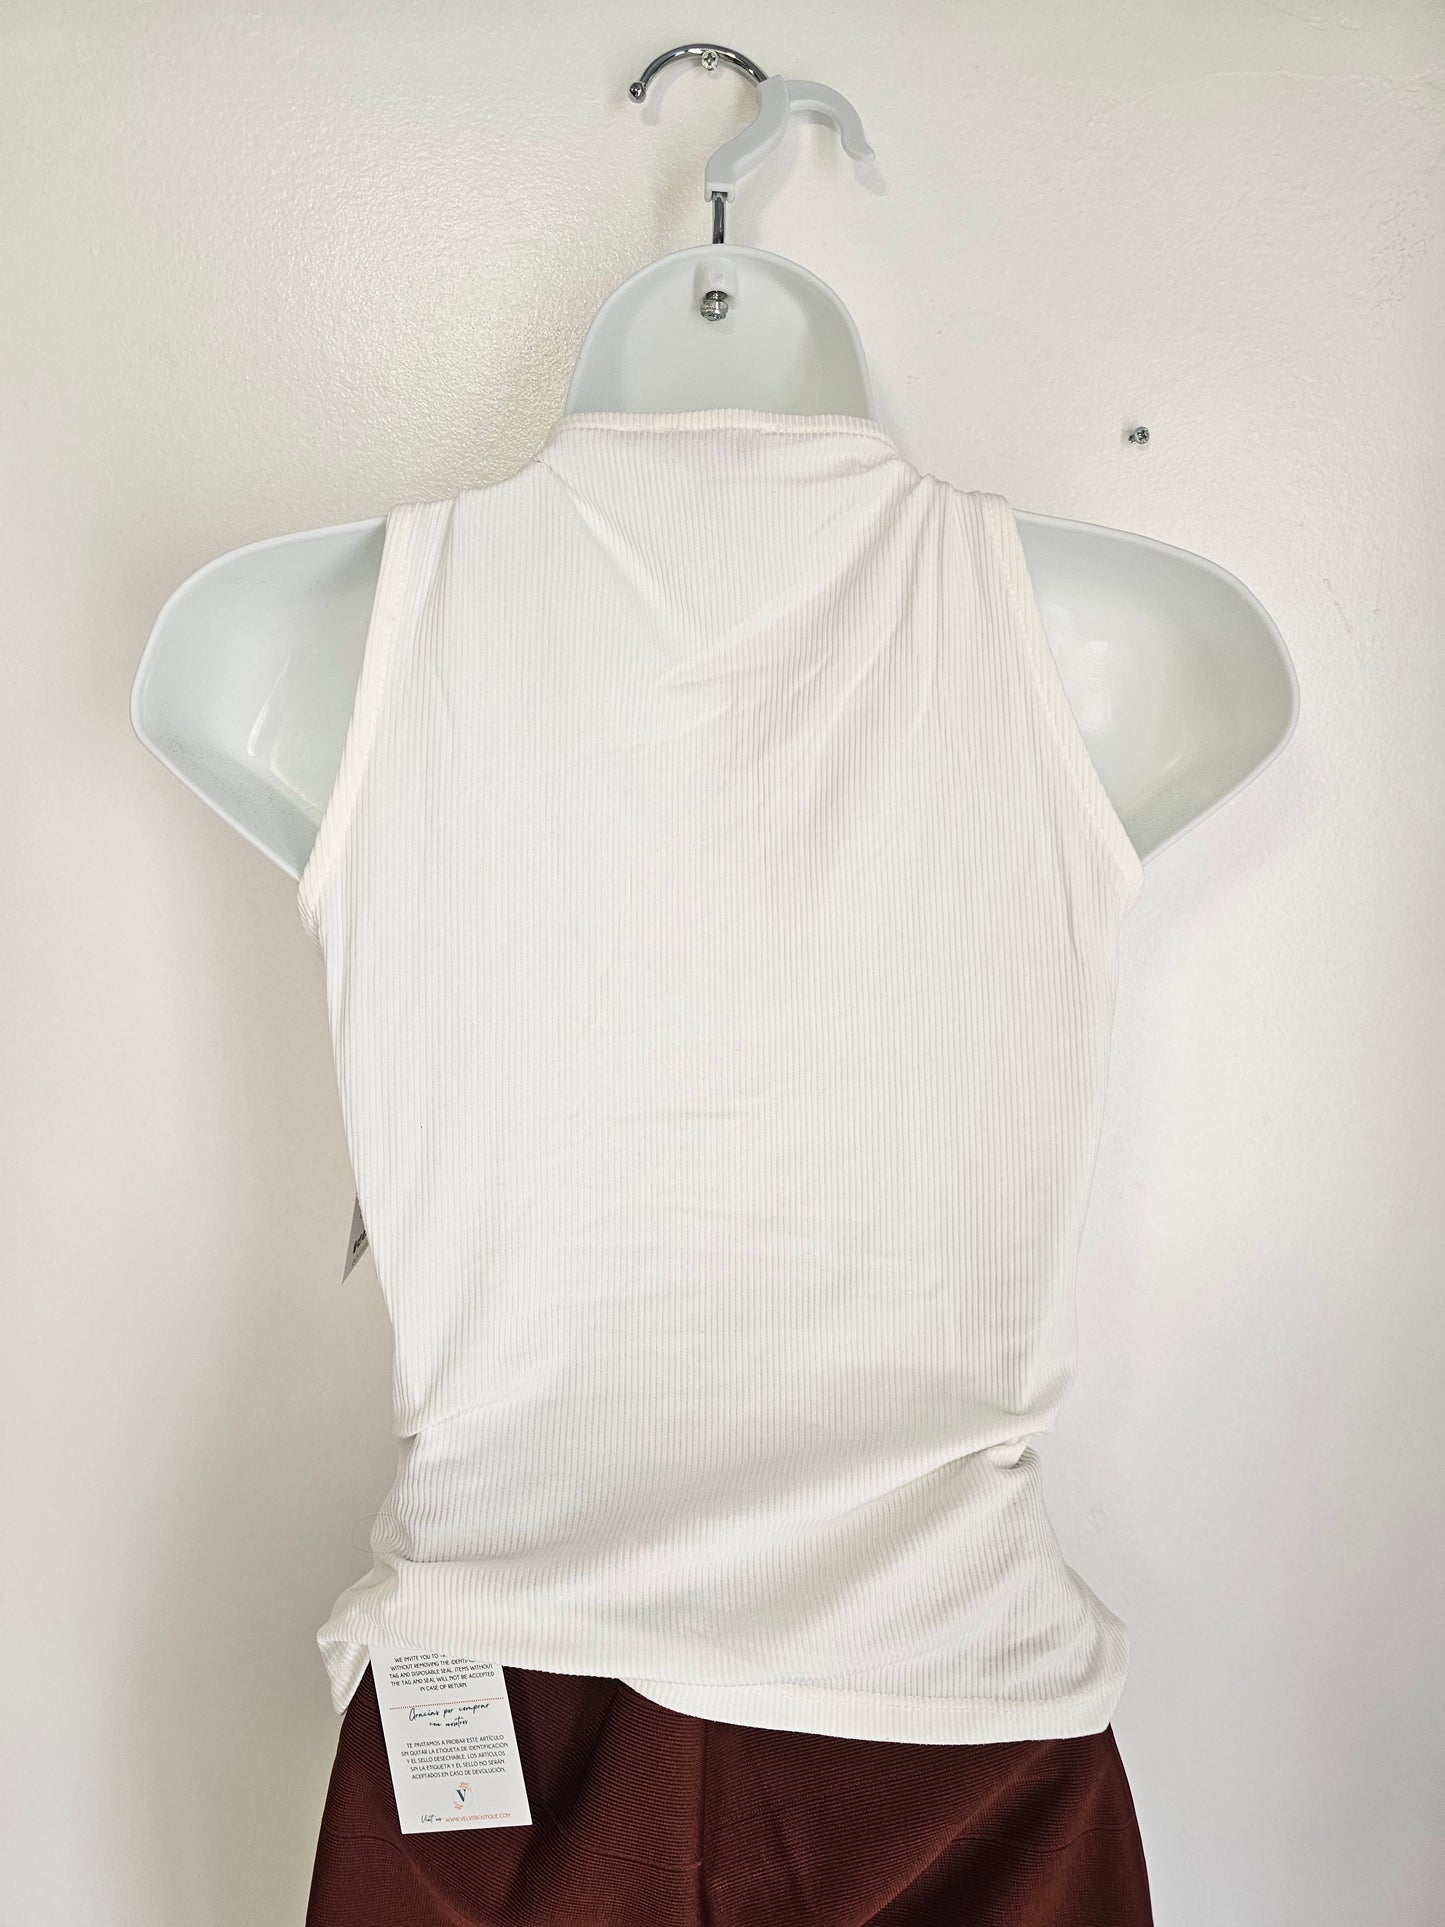 White Basic Top Cut-Out Rushed  Sleeveless